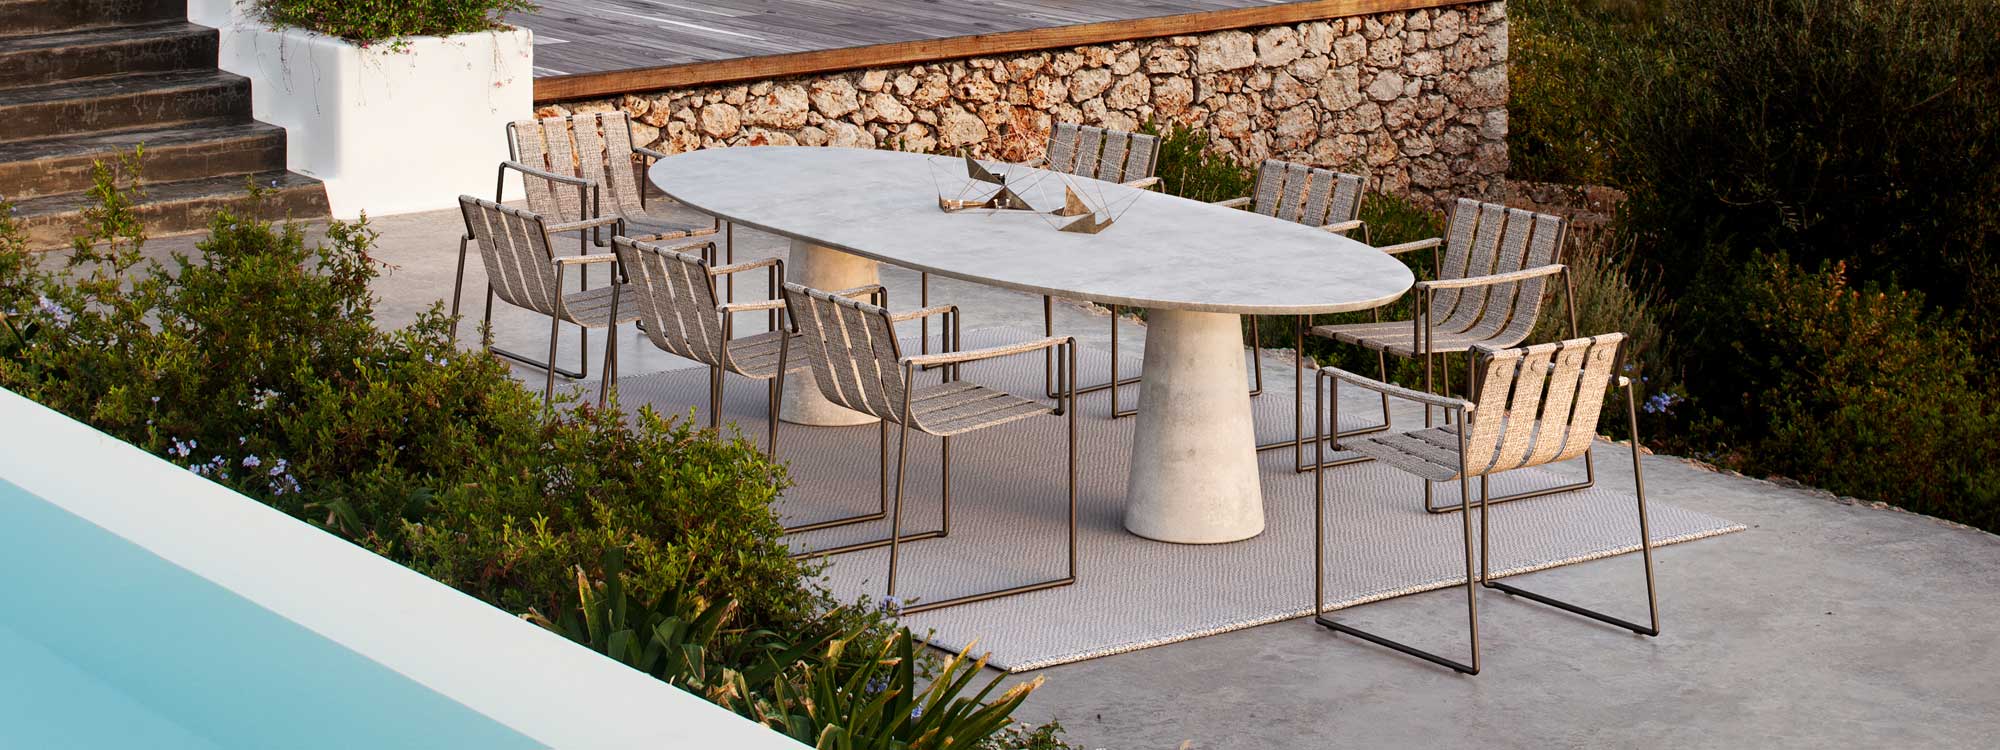 Image of Royal Botania Strappy chair & Conix elliptical concrete table